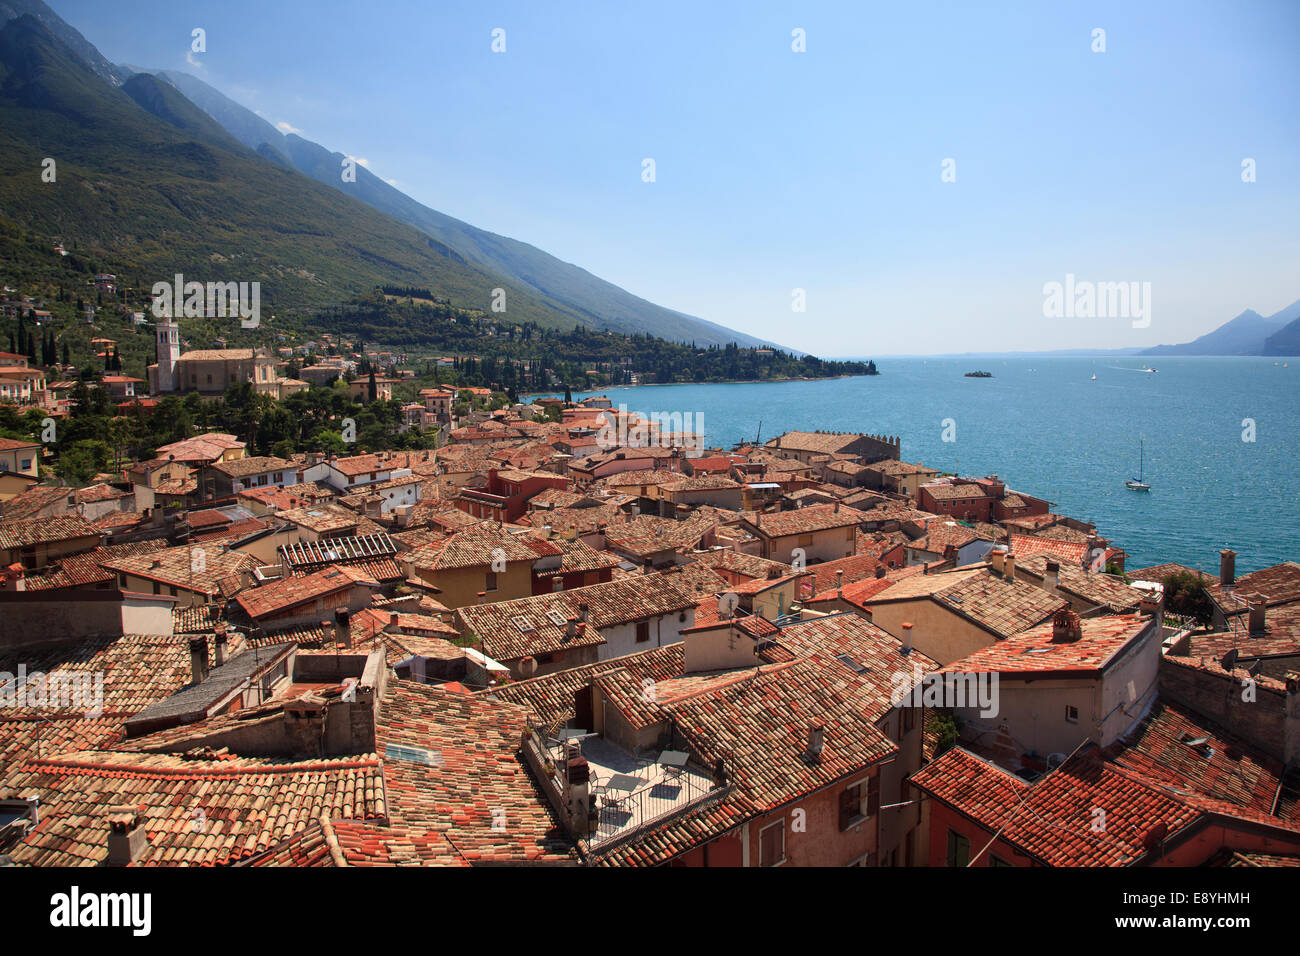 Tiled roofs of Malcesine Stock Photo